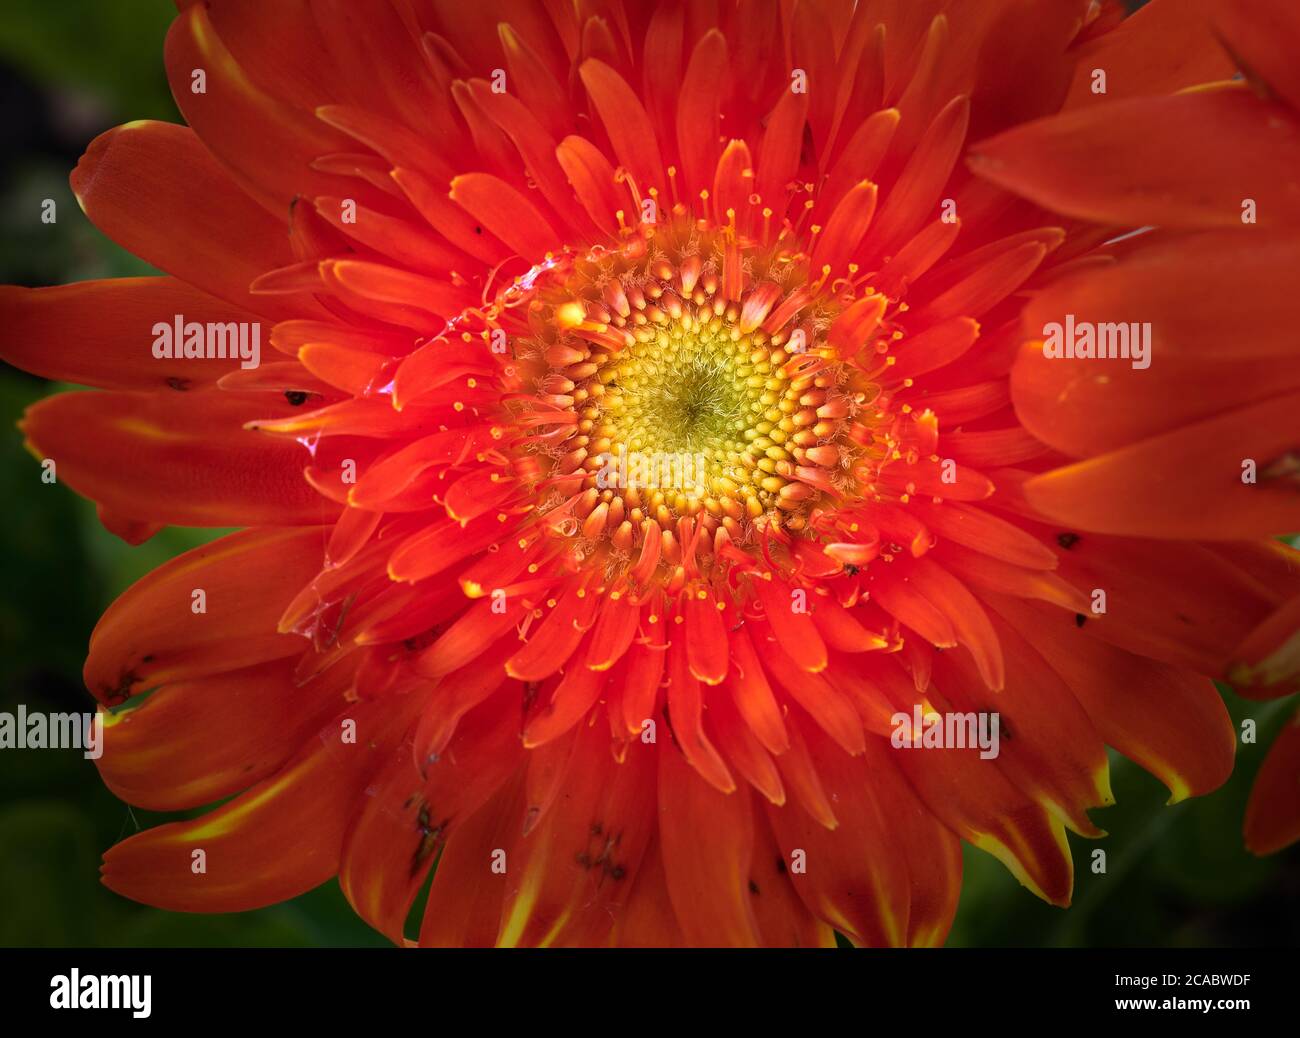 Core of the red, yellow and orange China Aster (callistephus chinensis) flower. Stock Photo